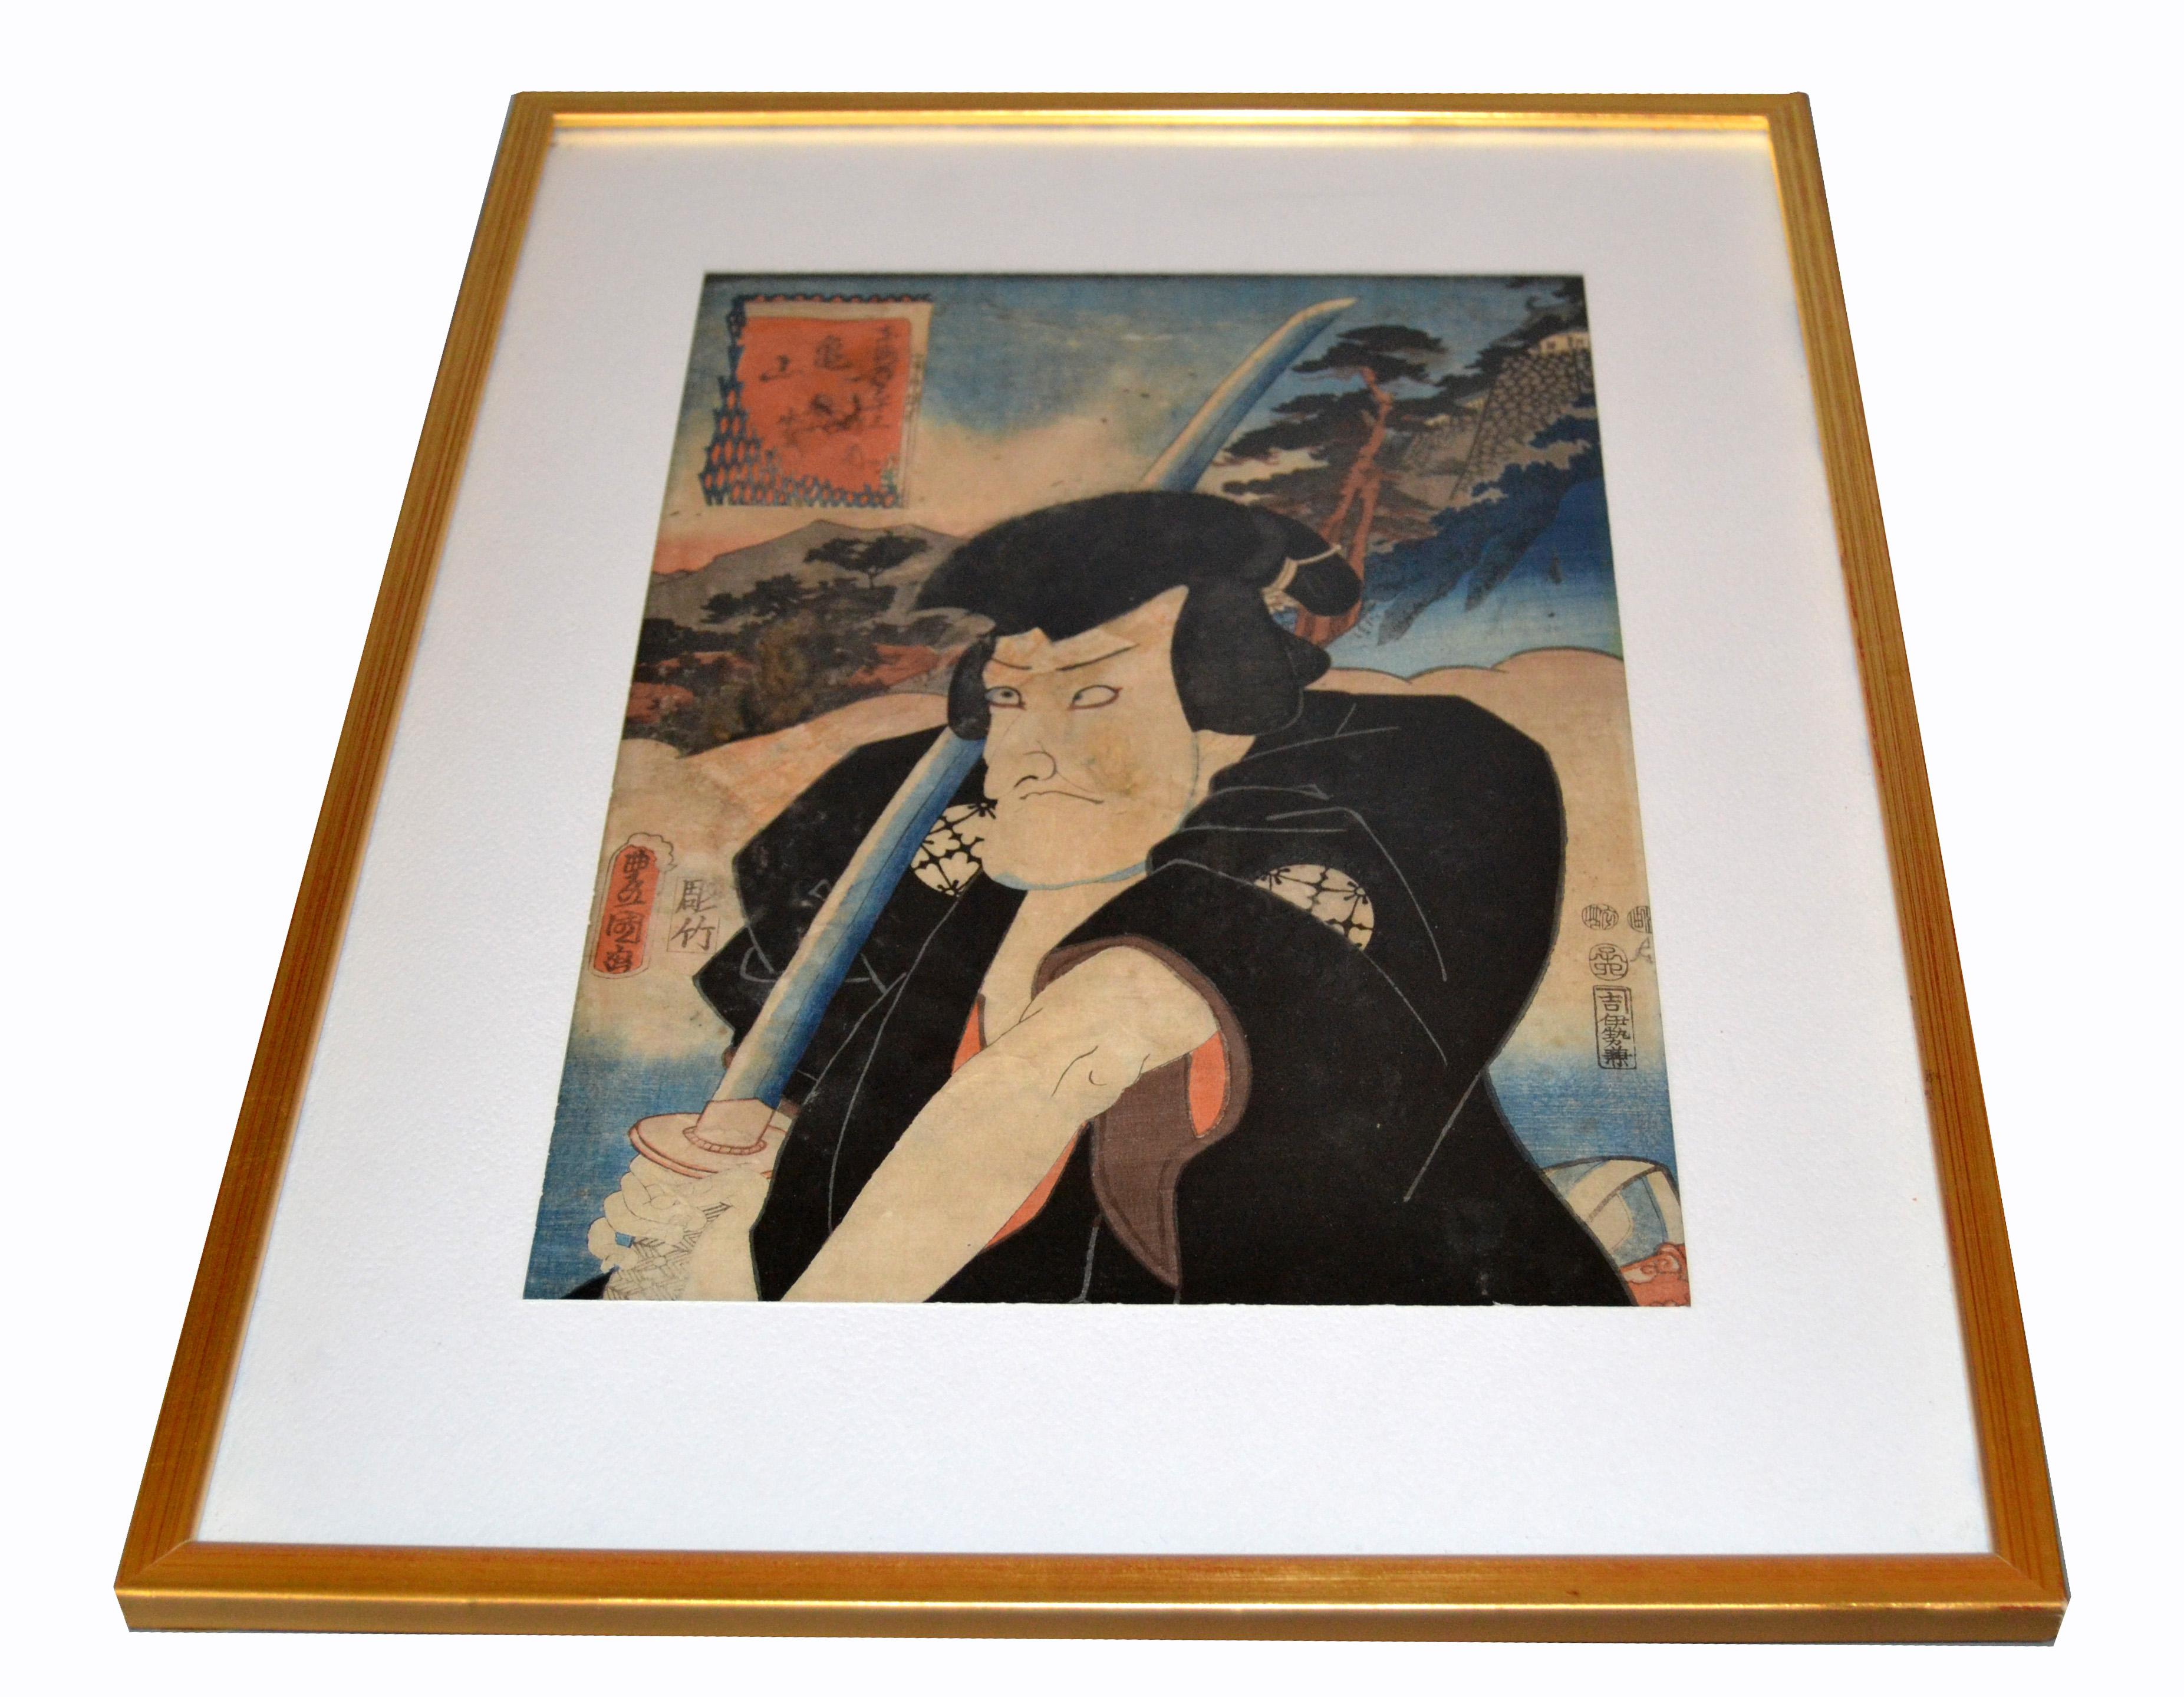 Original Utagawa Toyokuni III Woodblock print on parchment paper in gilt frame.
Marked by Artist: Utagawa Toyokuni III (1786-1864) and dated 1857.
 